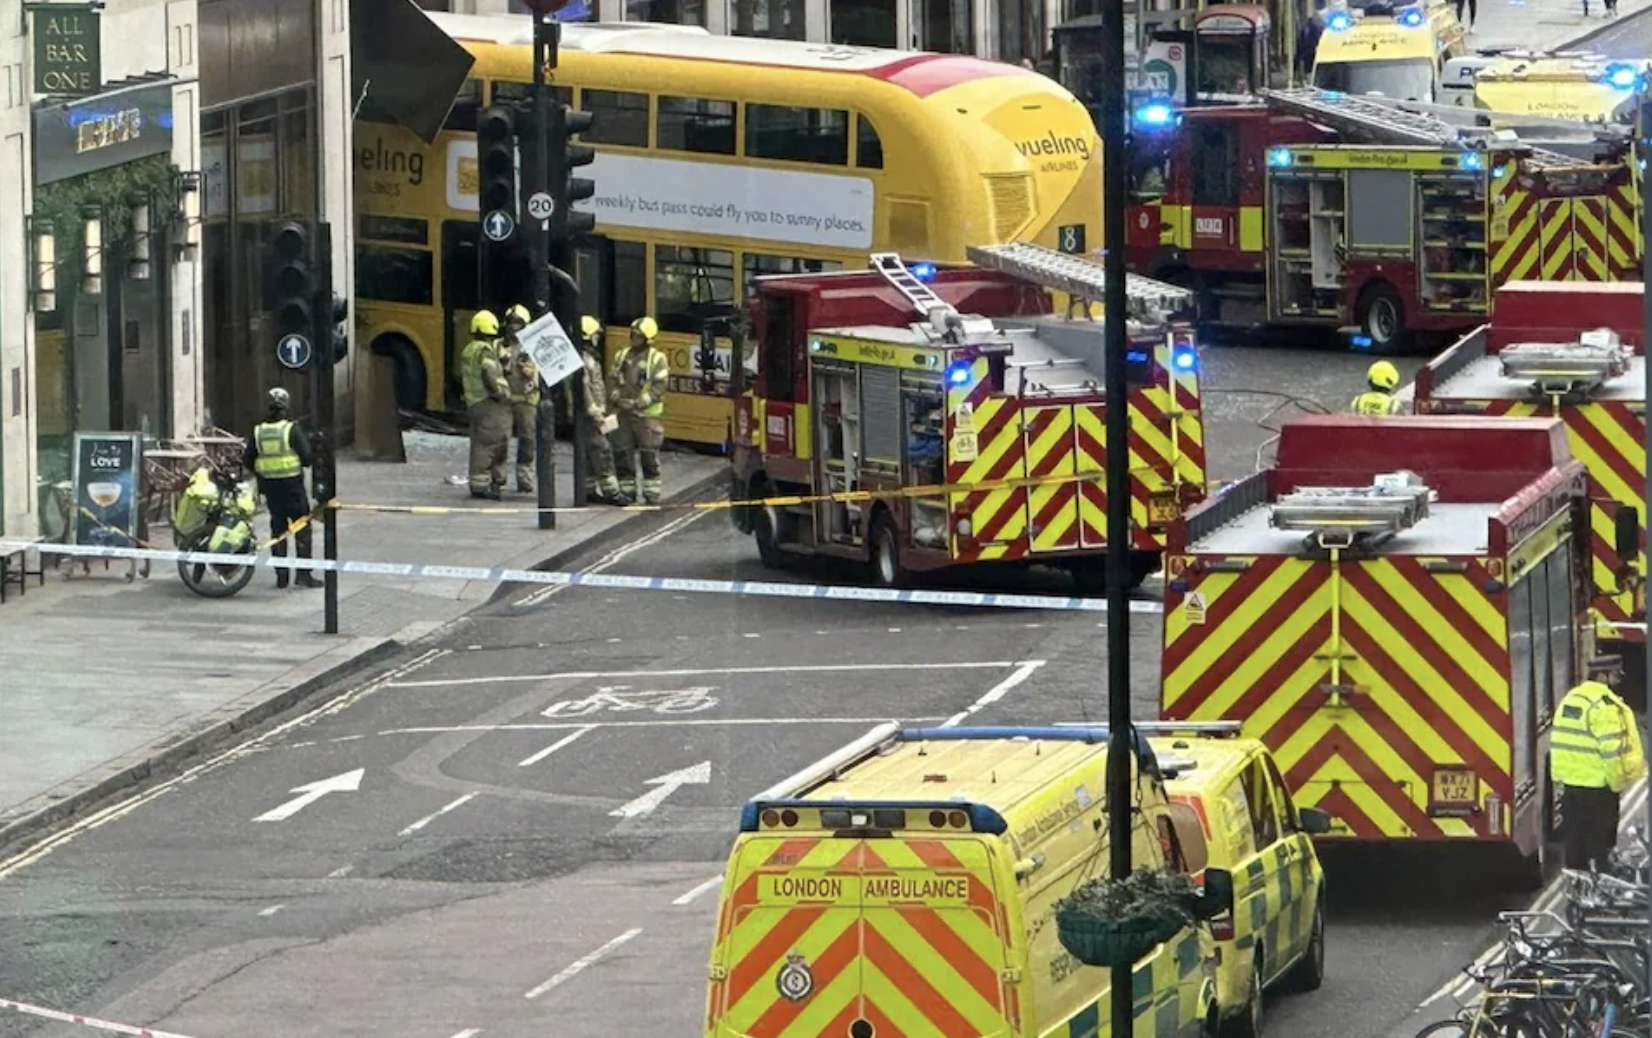 Bus_Crashes_into_Building_on_New_Oxford_Street.png